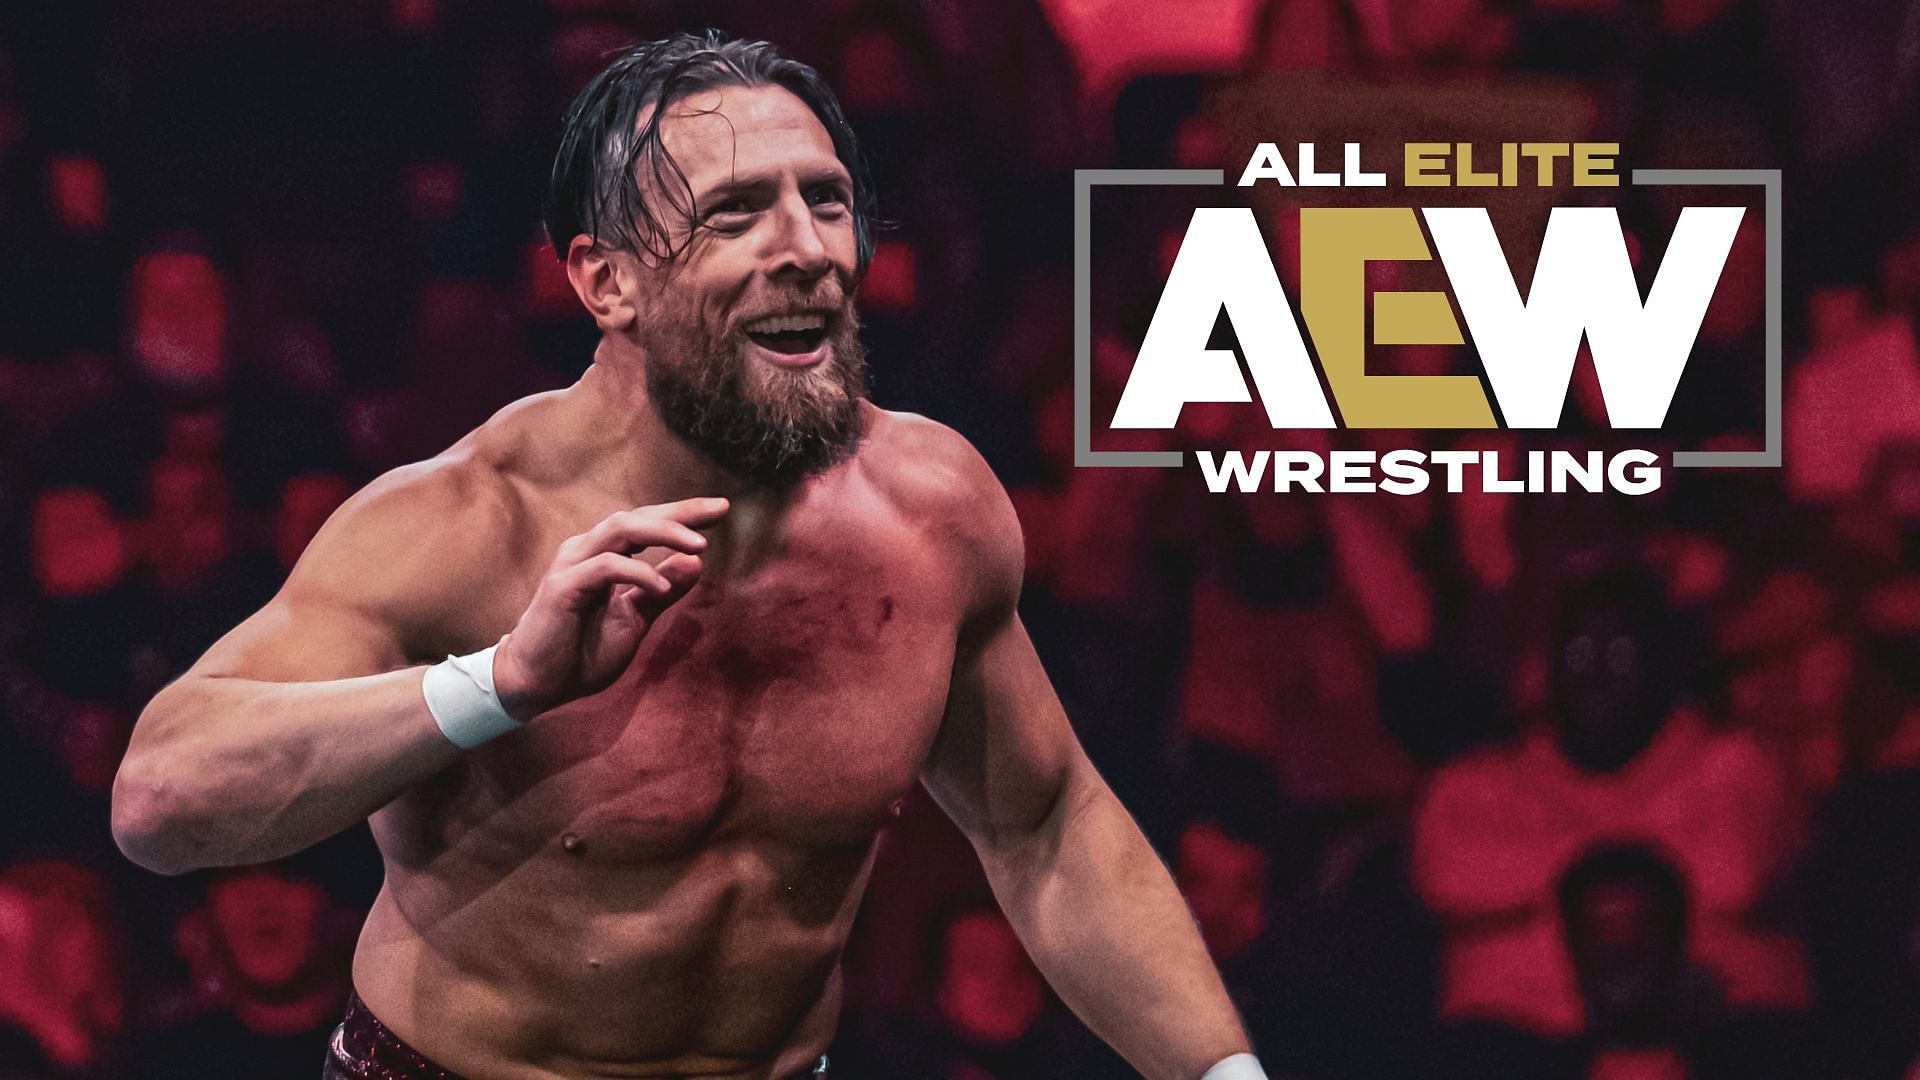 Bryan Danielson at an AEW event (credit: Jay Lee Photography)